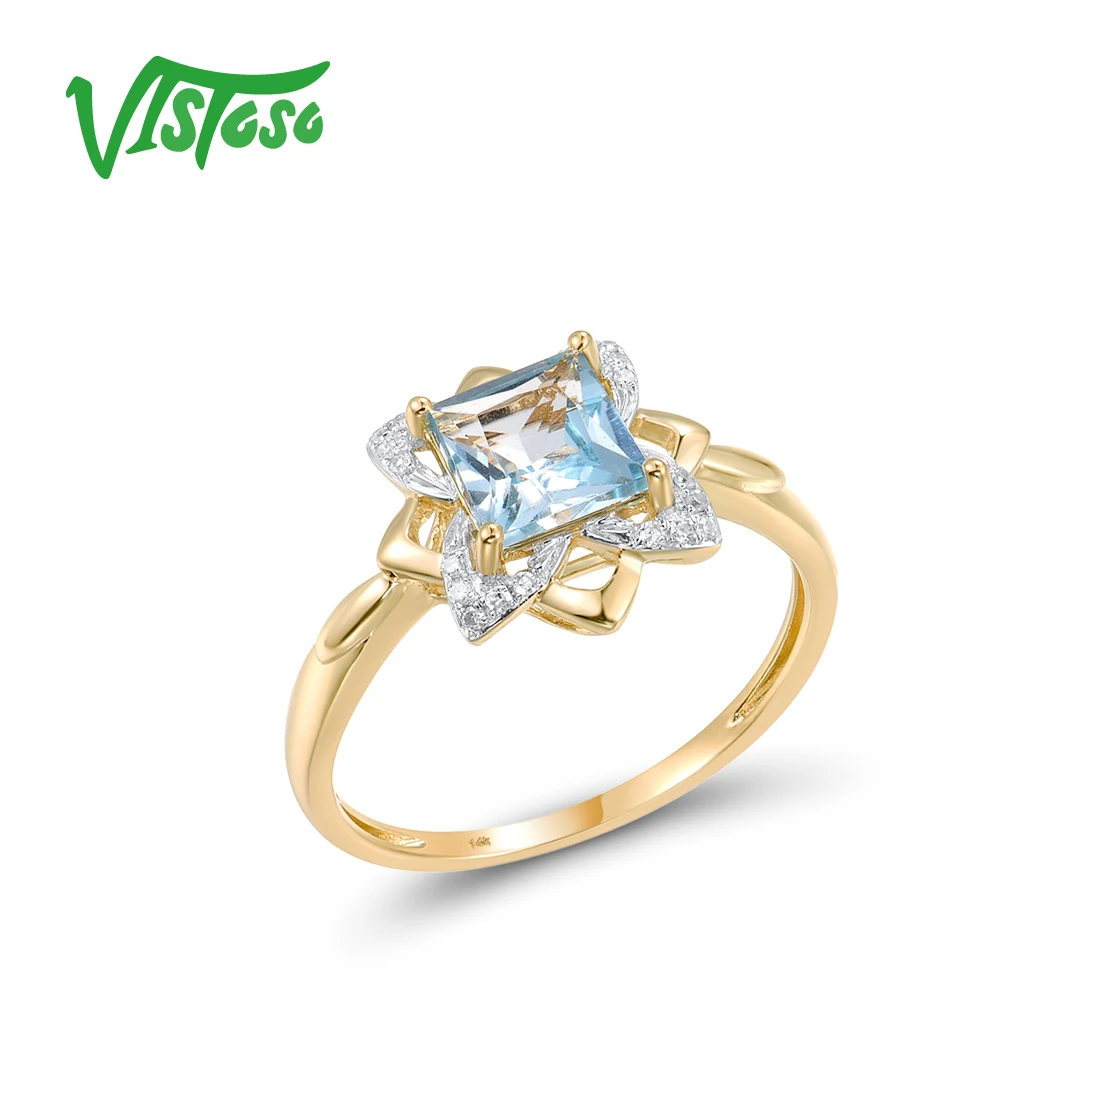 

VISTOSO Genuine 14K 585 Yellow Gold Rings For Women Sparkling Square Blue Topaz Diamond Classic Rings Gorgeous Fine Jewelry